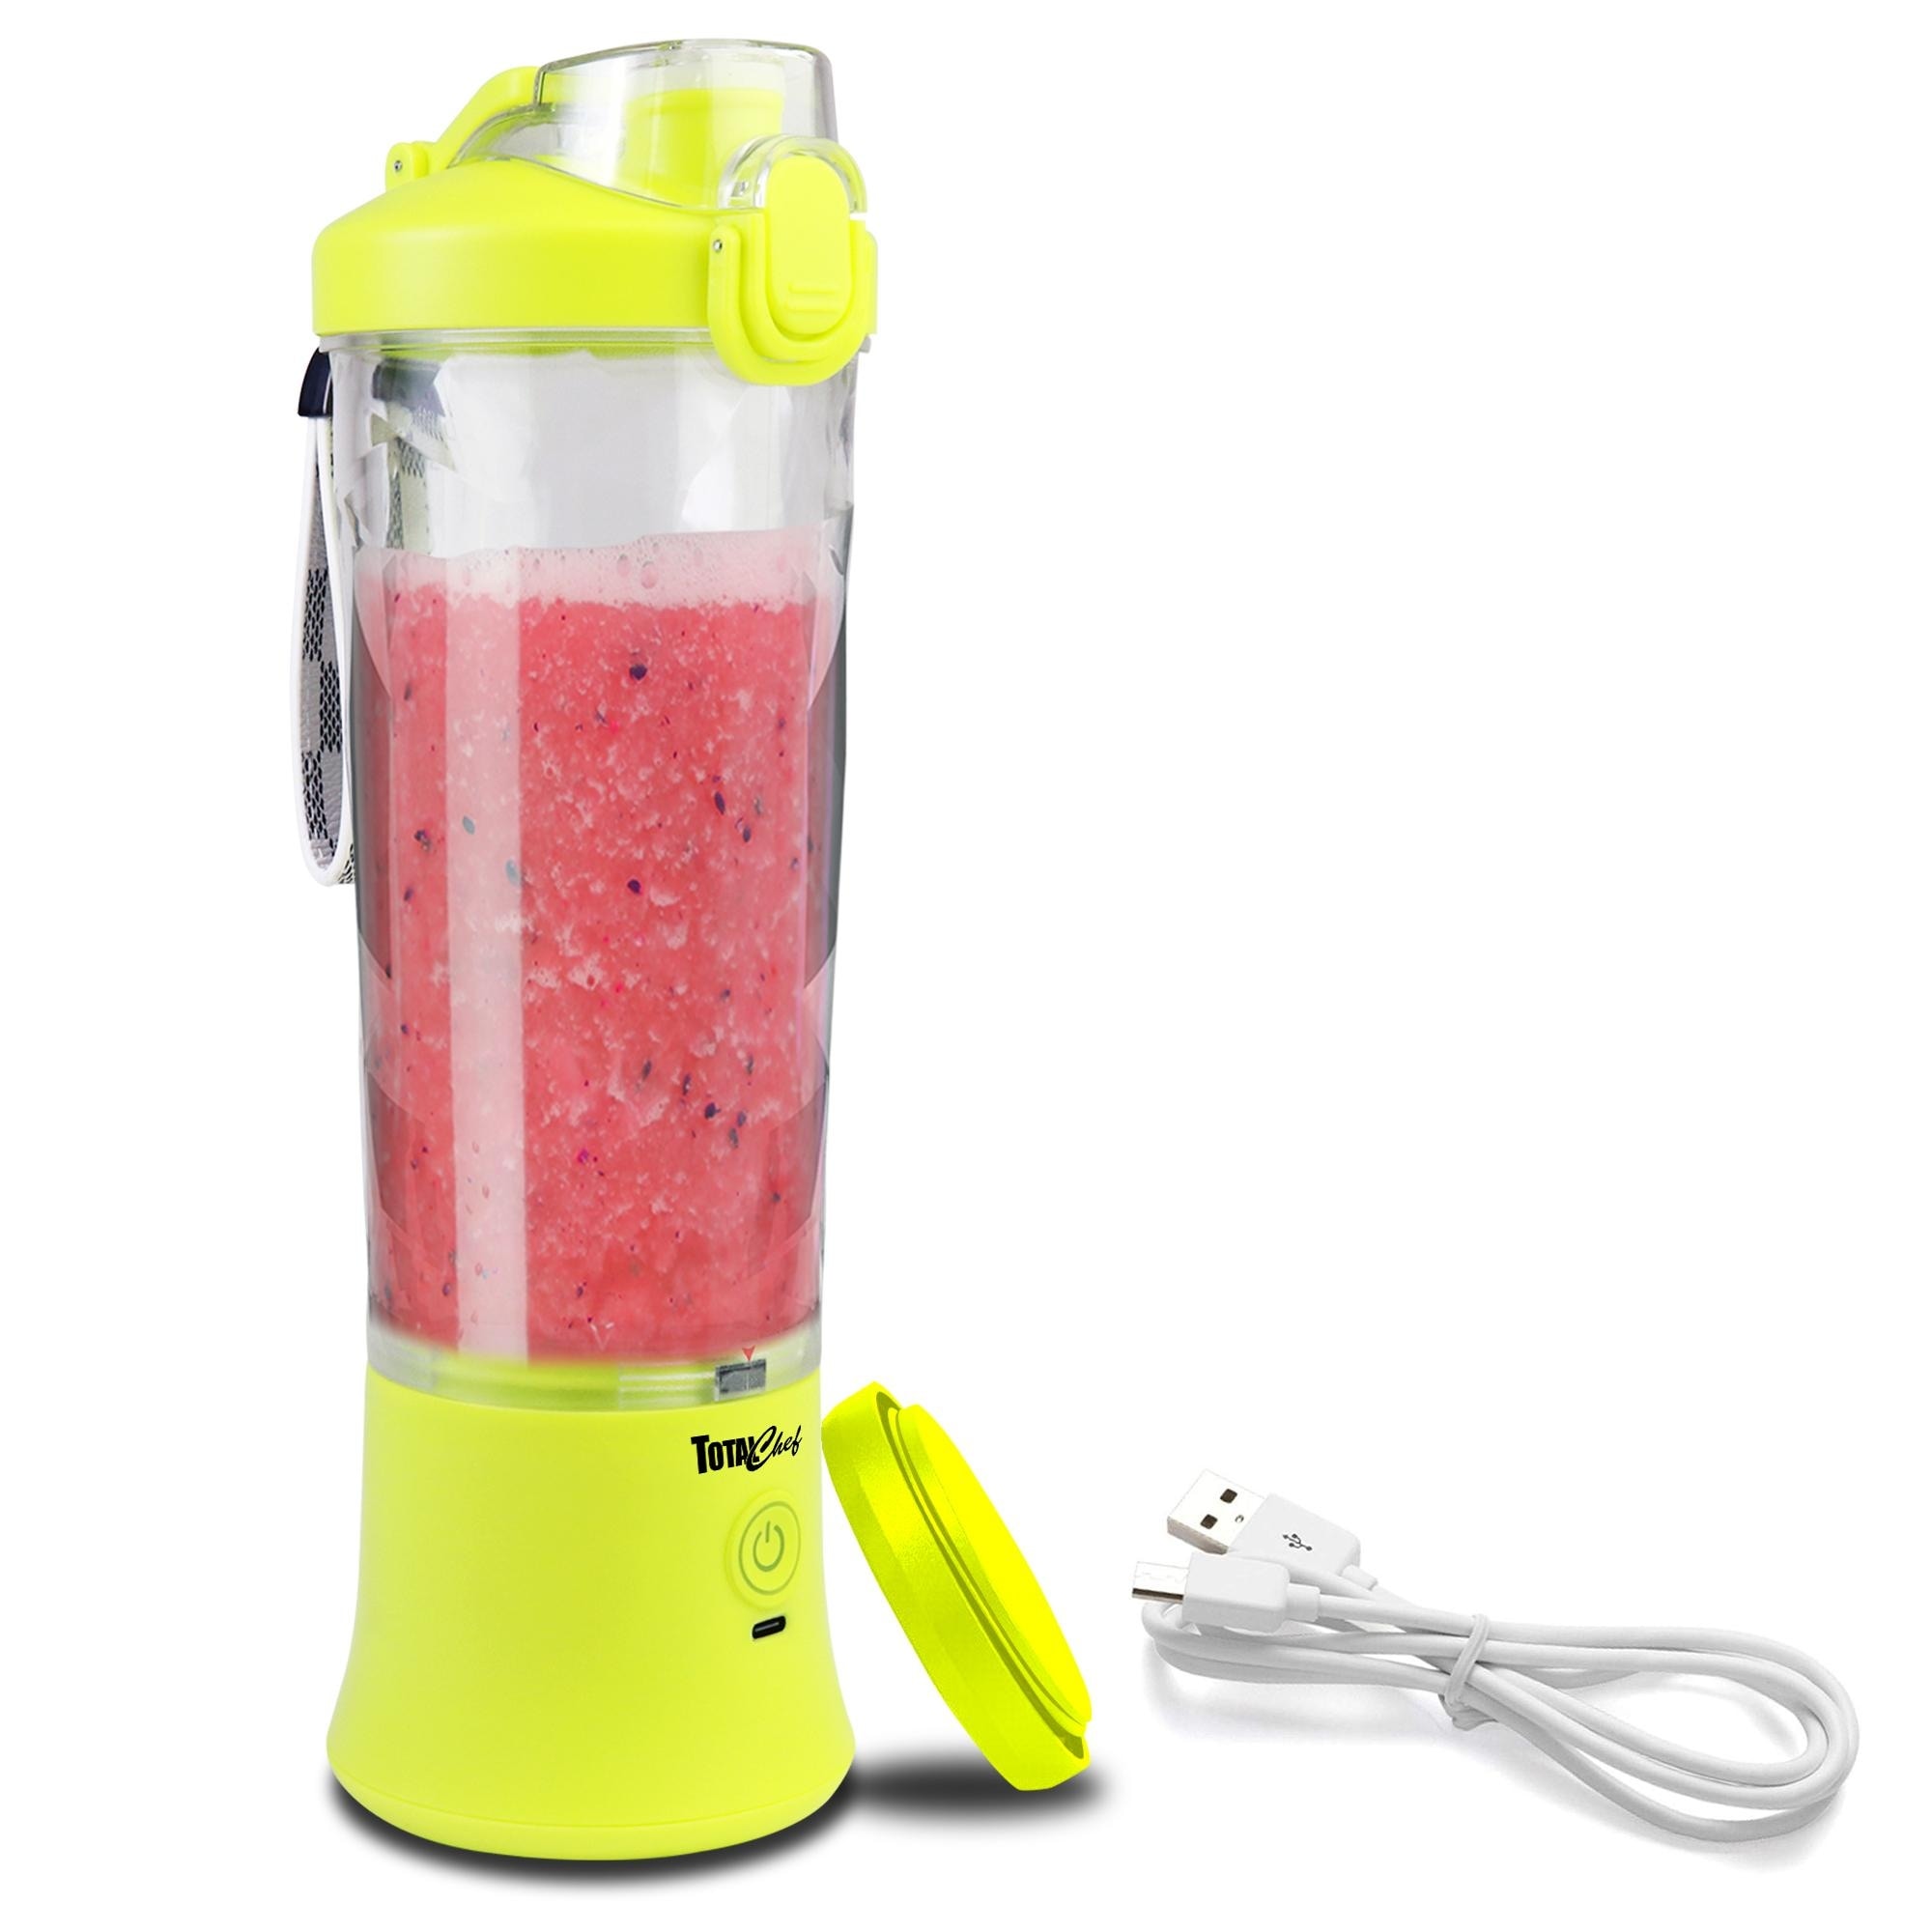 https://ak1.ostkcdn.com/images/products/is/images/direct/e59a989581dca2a8c0d3e028b0adb20d4166d320/Total-Chef-Cordless-Portable-Blender%2C-20-oz-%28600-mL%29-Personal-Blender%2C-USB-Rechargeable%2C-Neon-Green.jpg